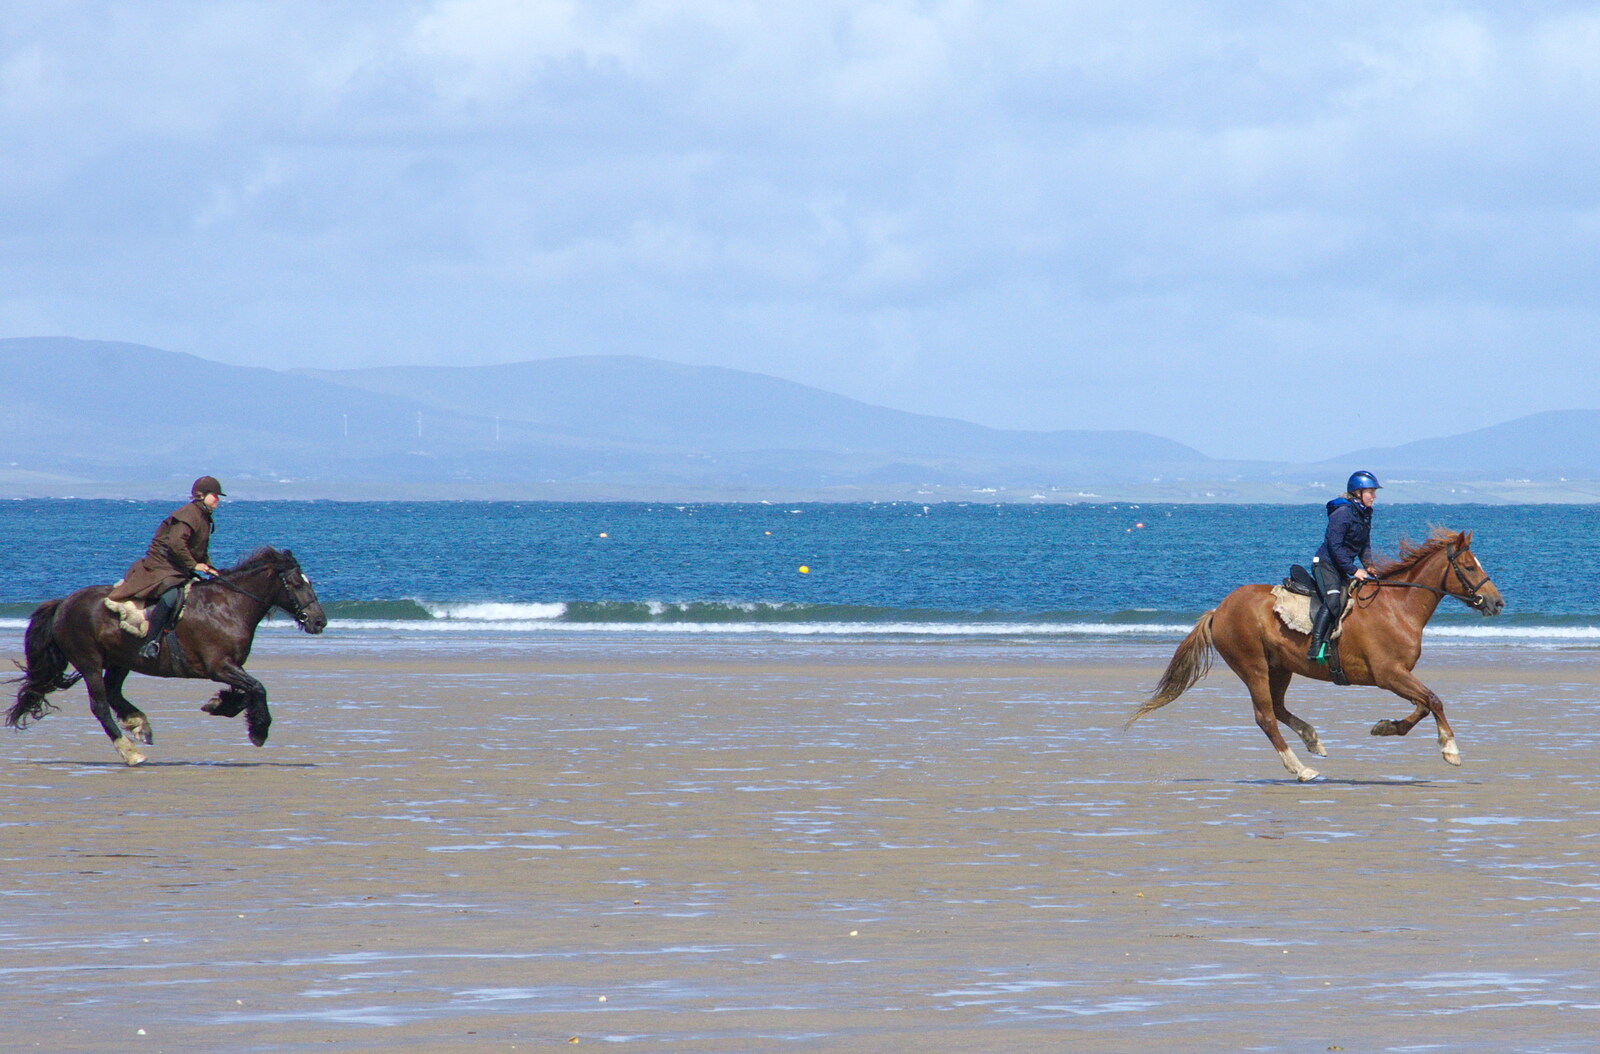 More galloping from Mullaghmore Beach and Marble Arch Caves, Sligo and Fermanagh, Ireland - 19th August 2019